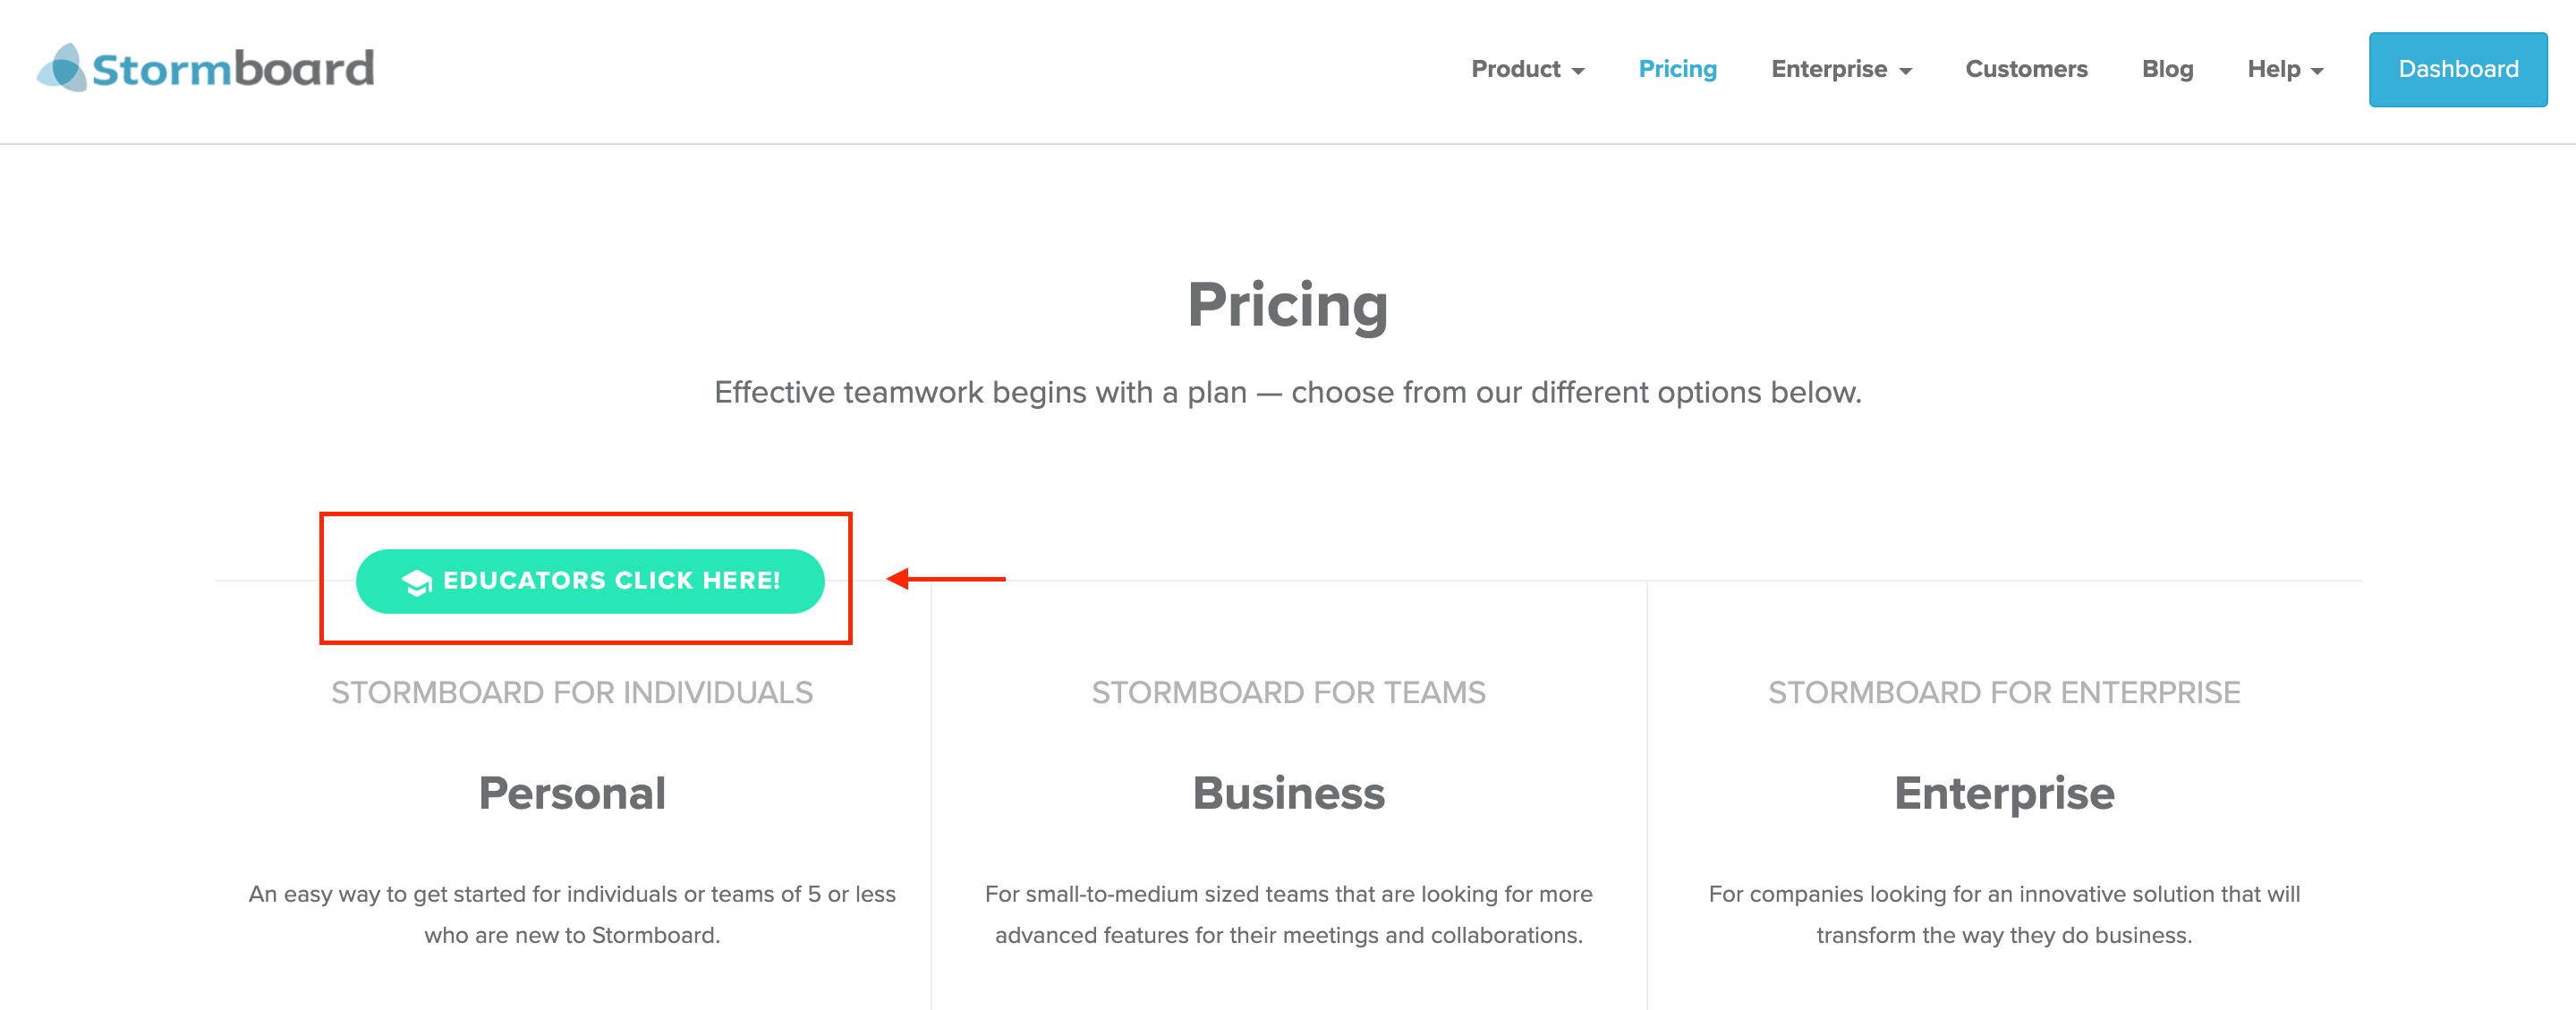 Price page overview